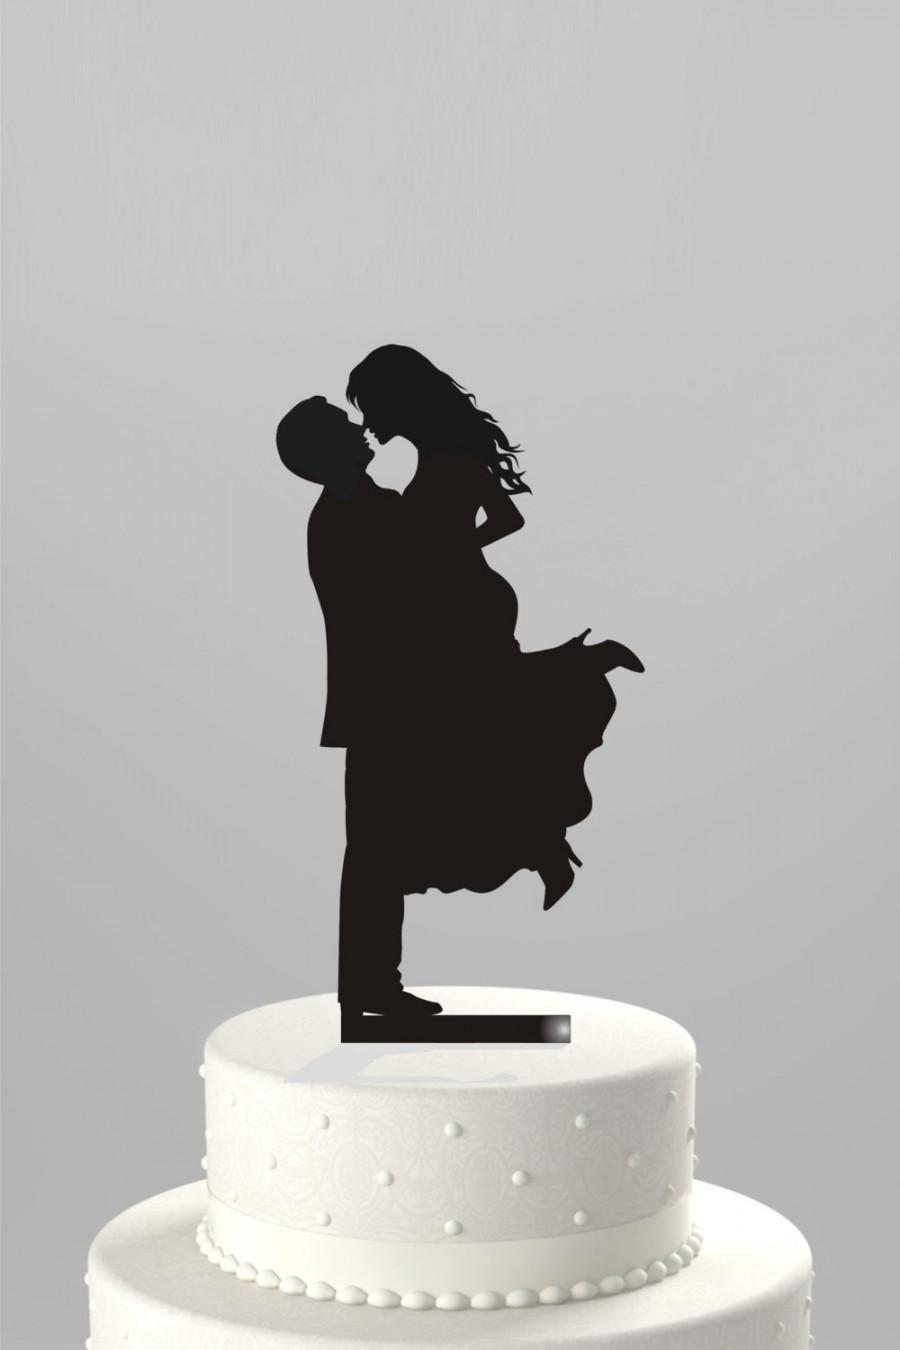 Wedding - SALE Price!! Ships Next Day - Wedding Cake Topper Silhouette Groom Lifting his Bride, BLACK Acrylic Cake Topper [CT17]